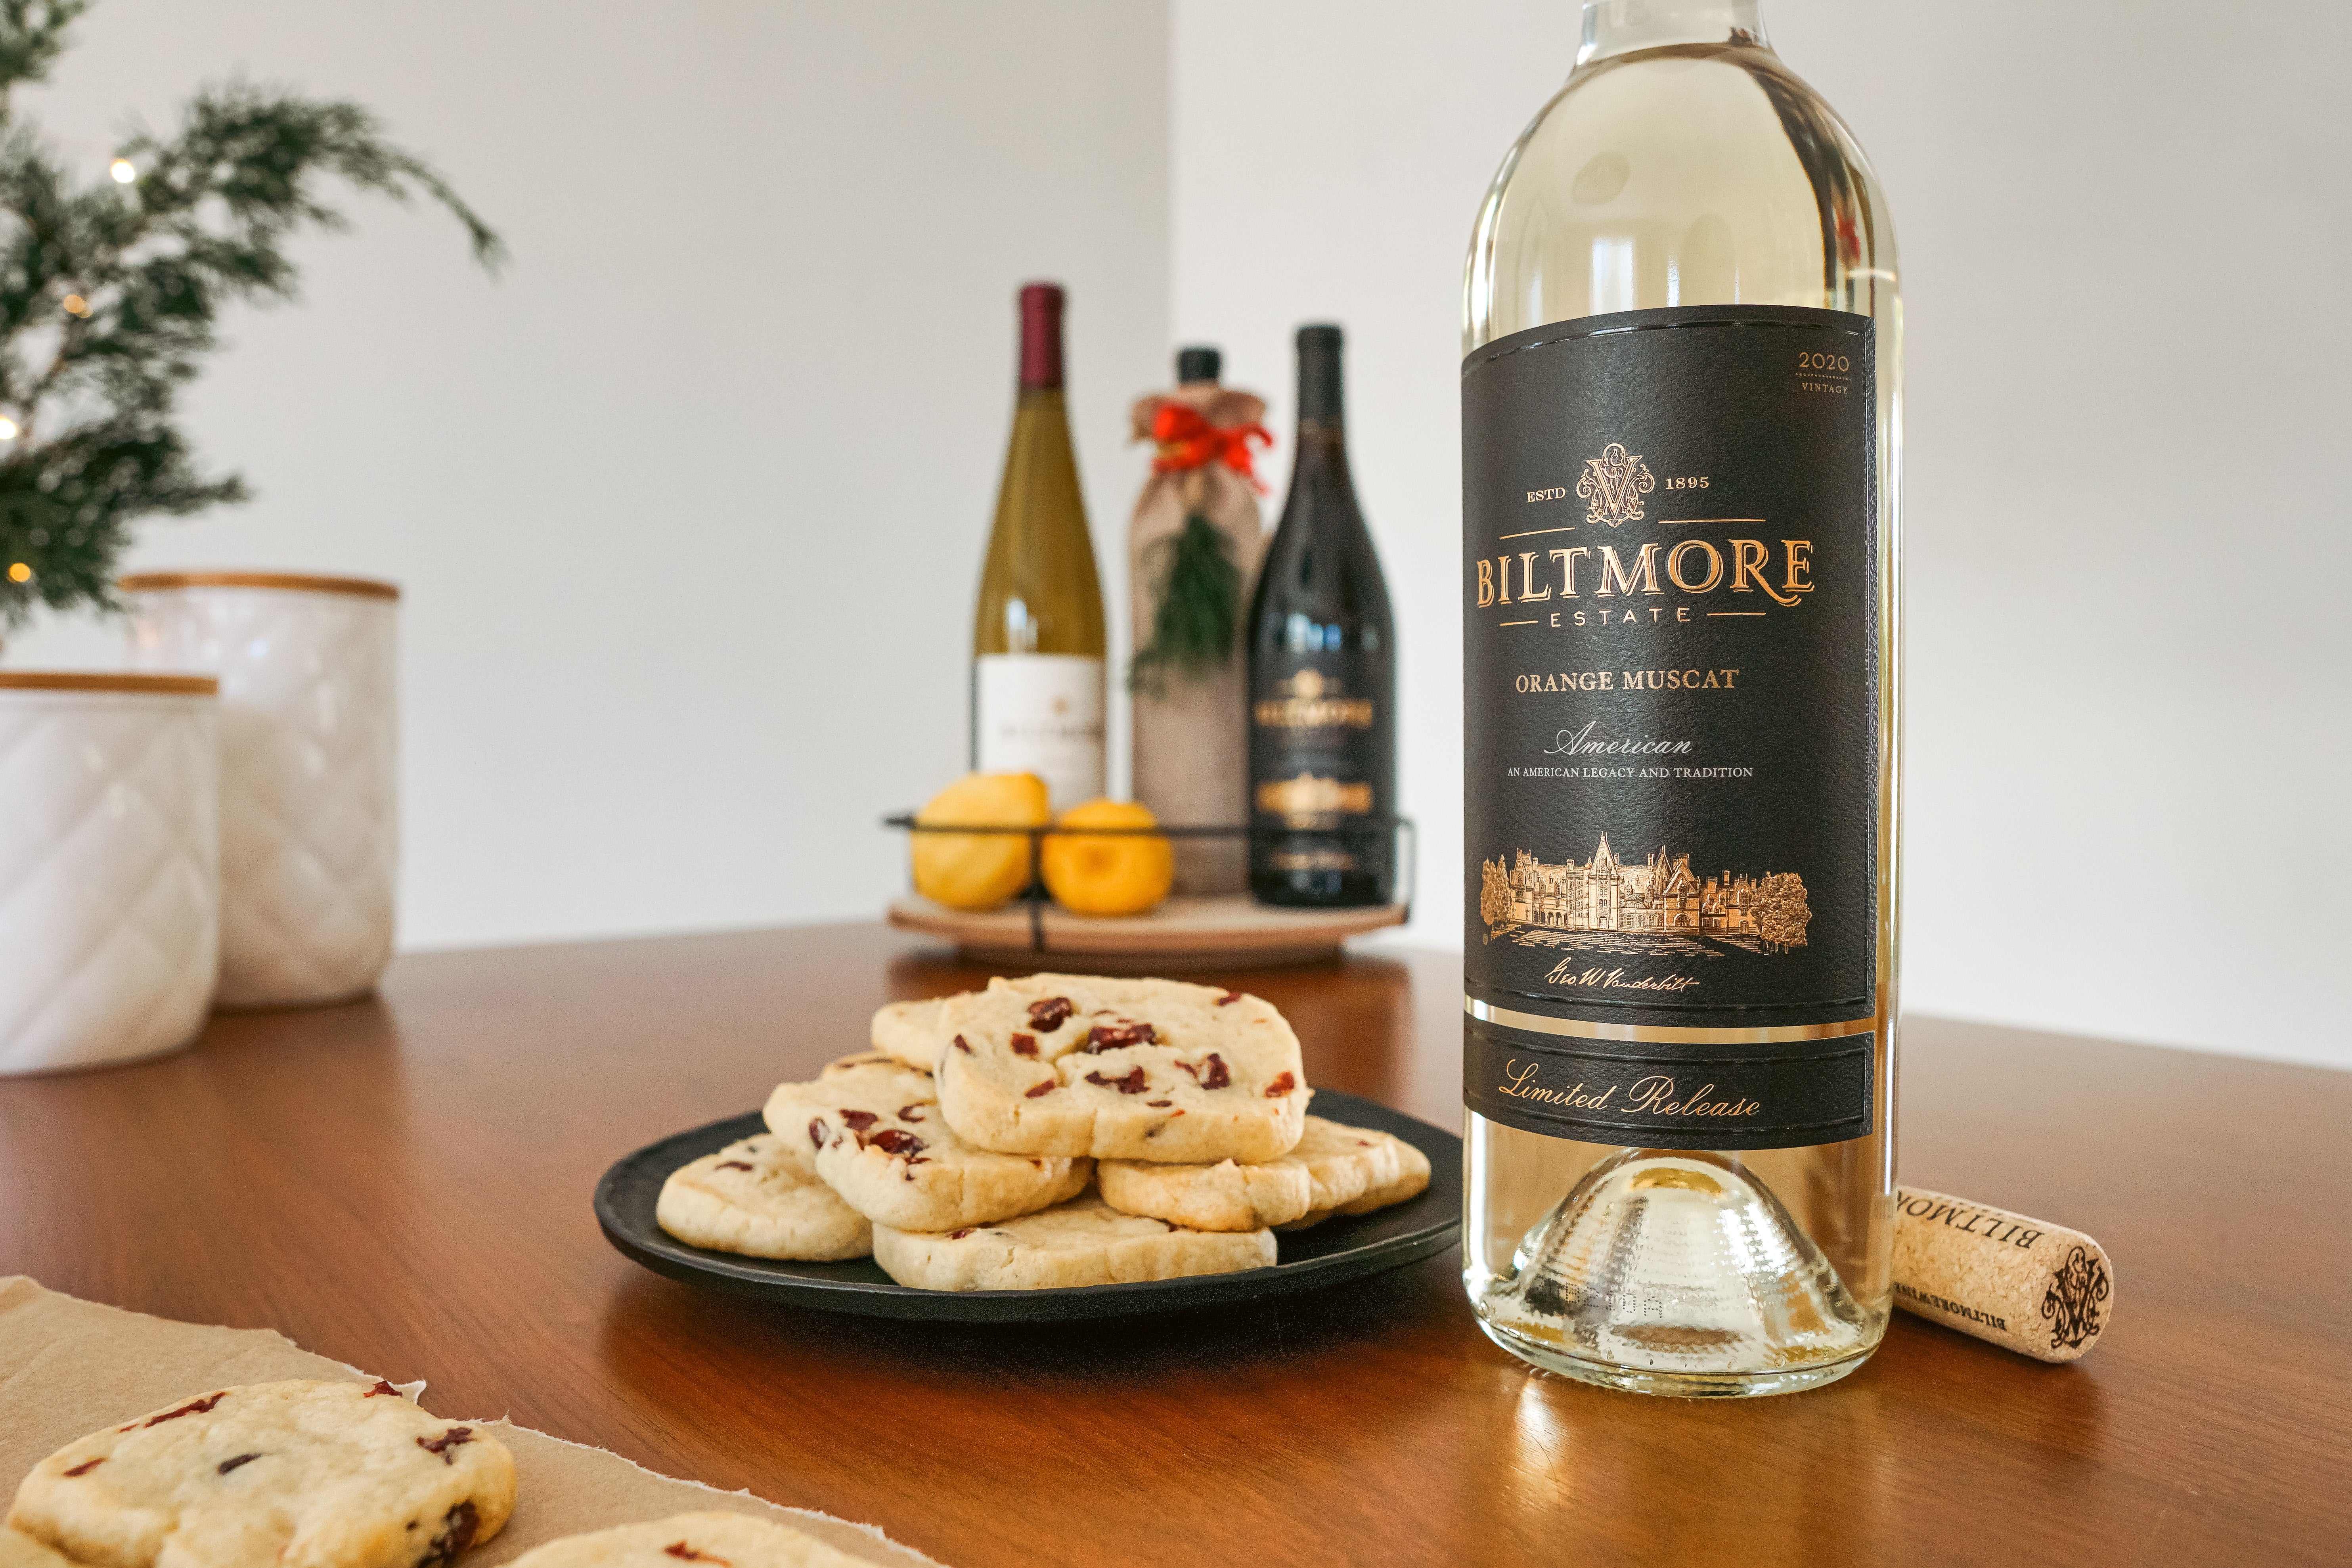 Biltmore Estate Limited Release Orange Muscat wine paired with Lemon-Cranberry Shortbread cookies